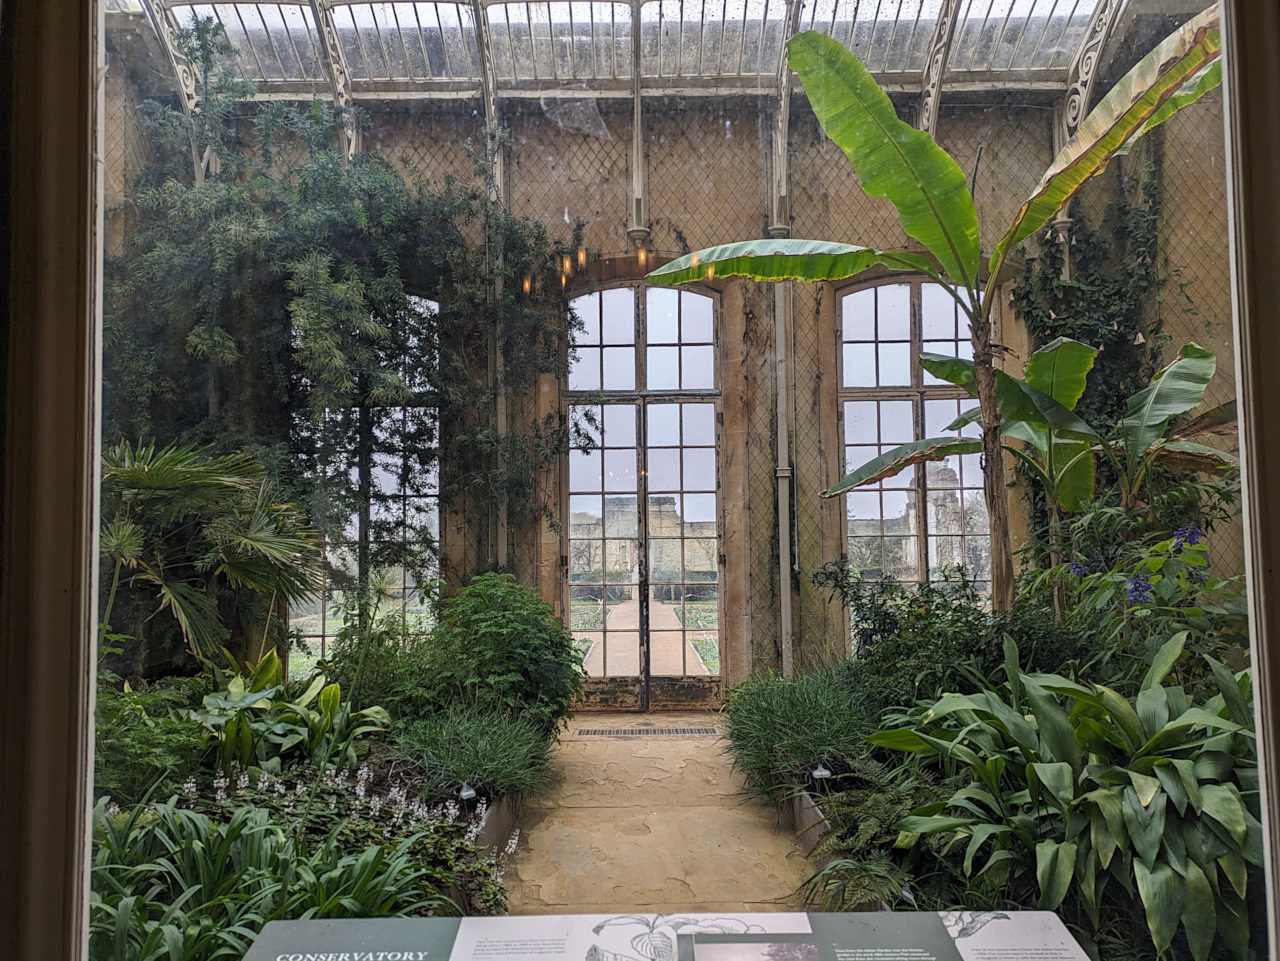 Conservatory with green plants and trees.